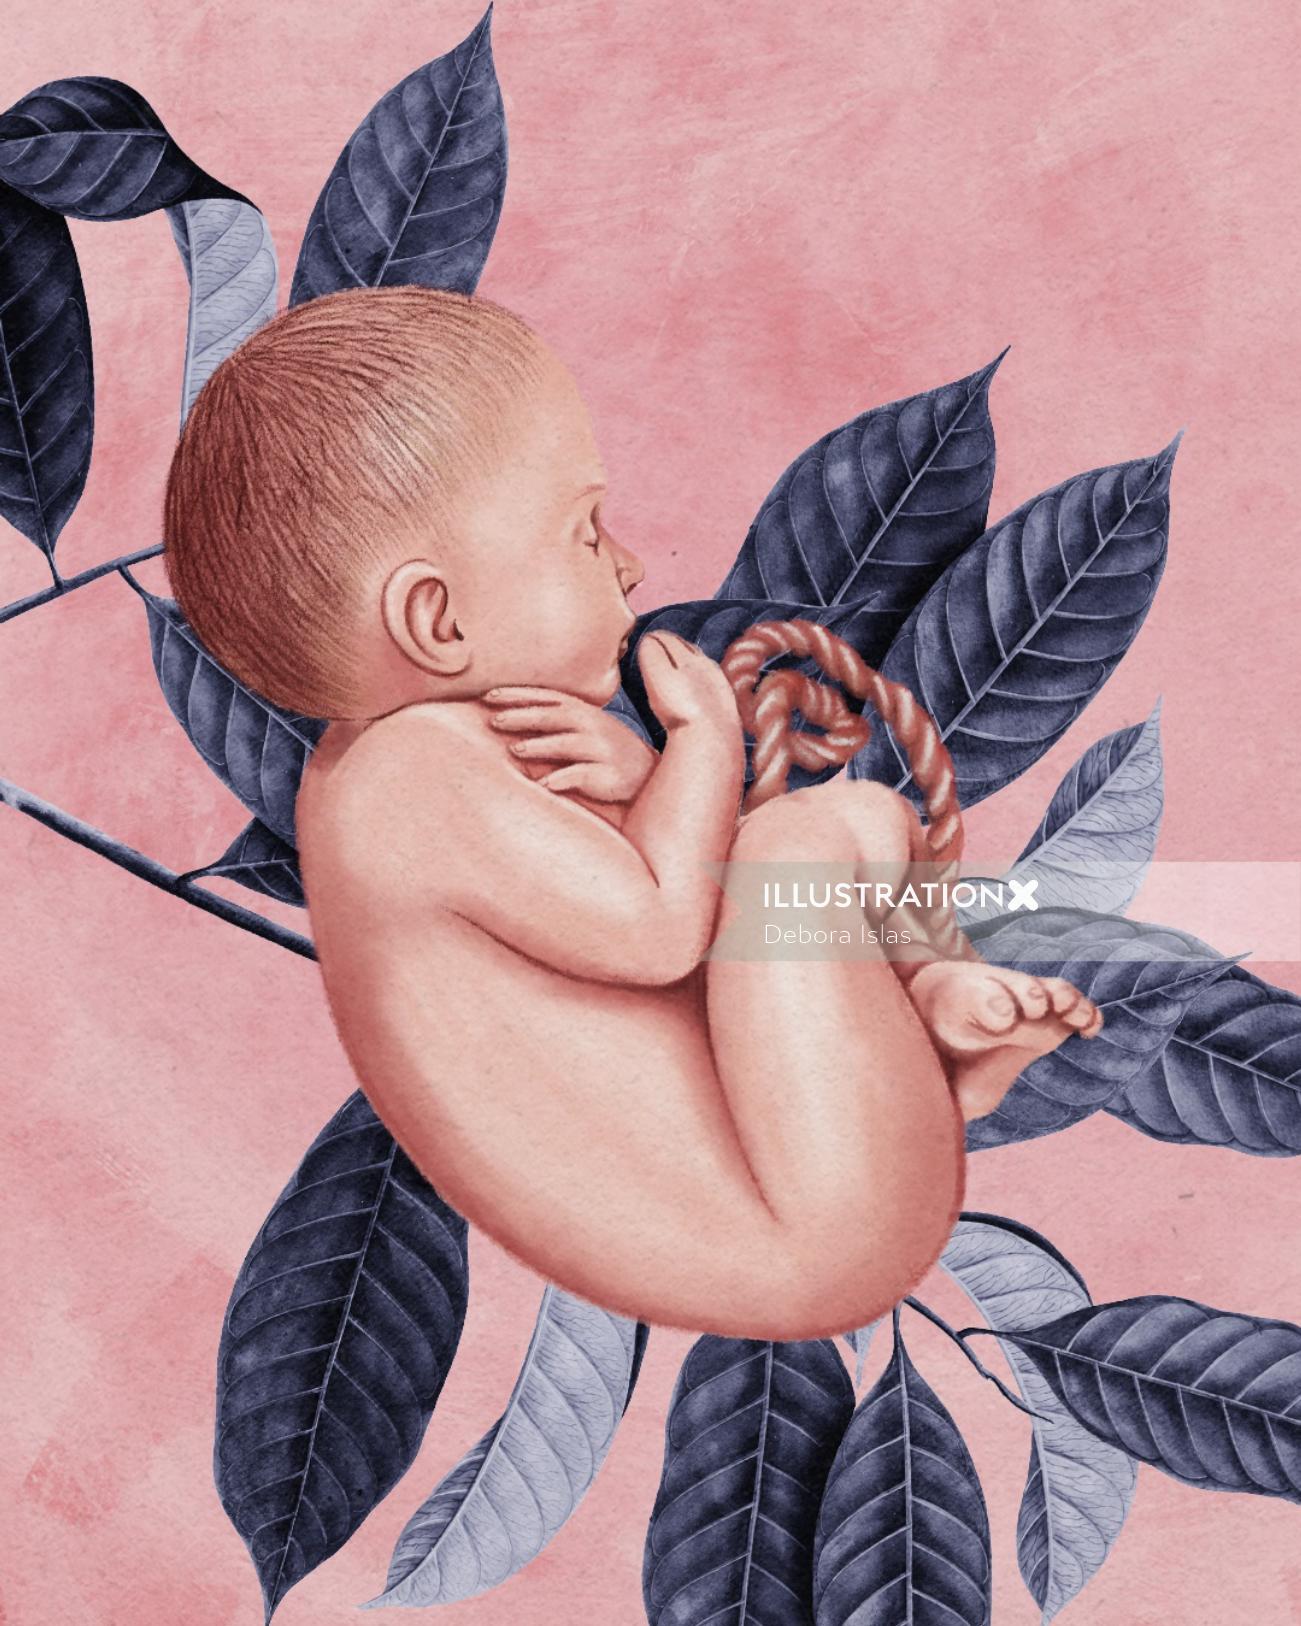 Illustration of baby in womb